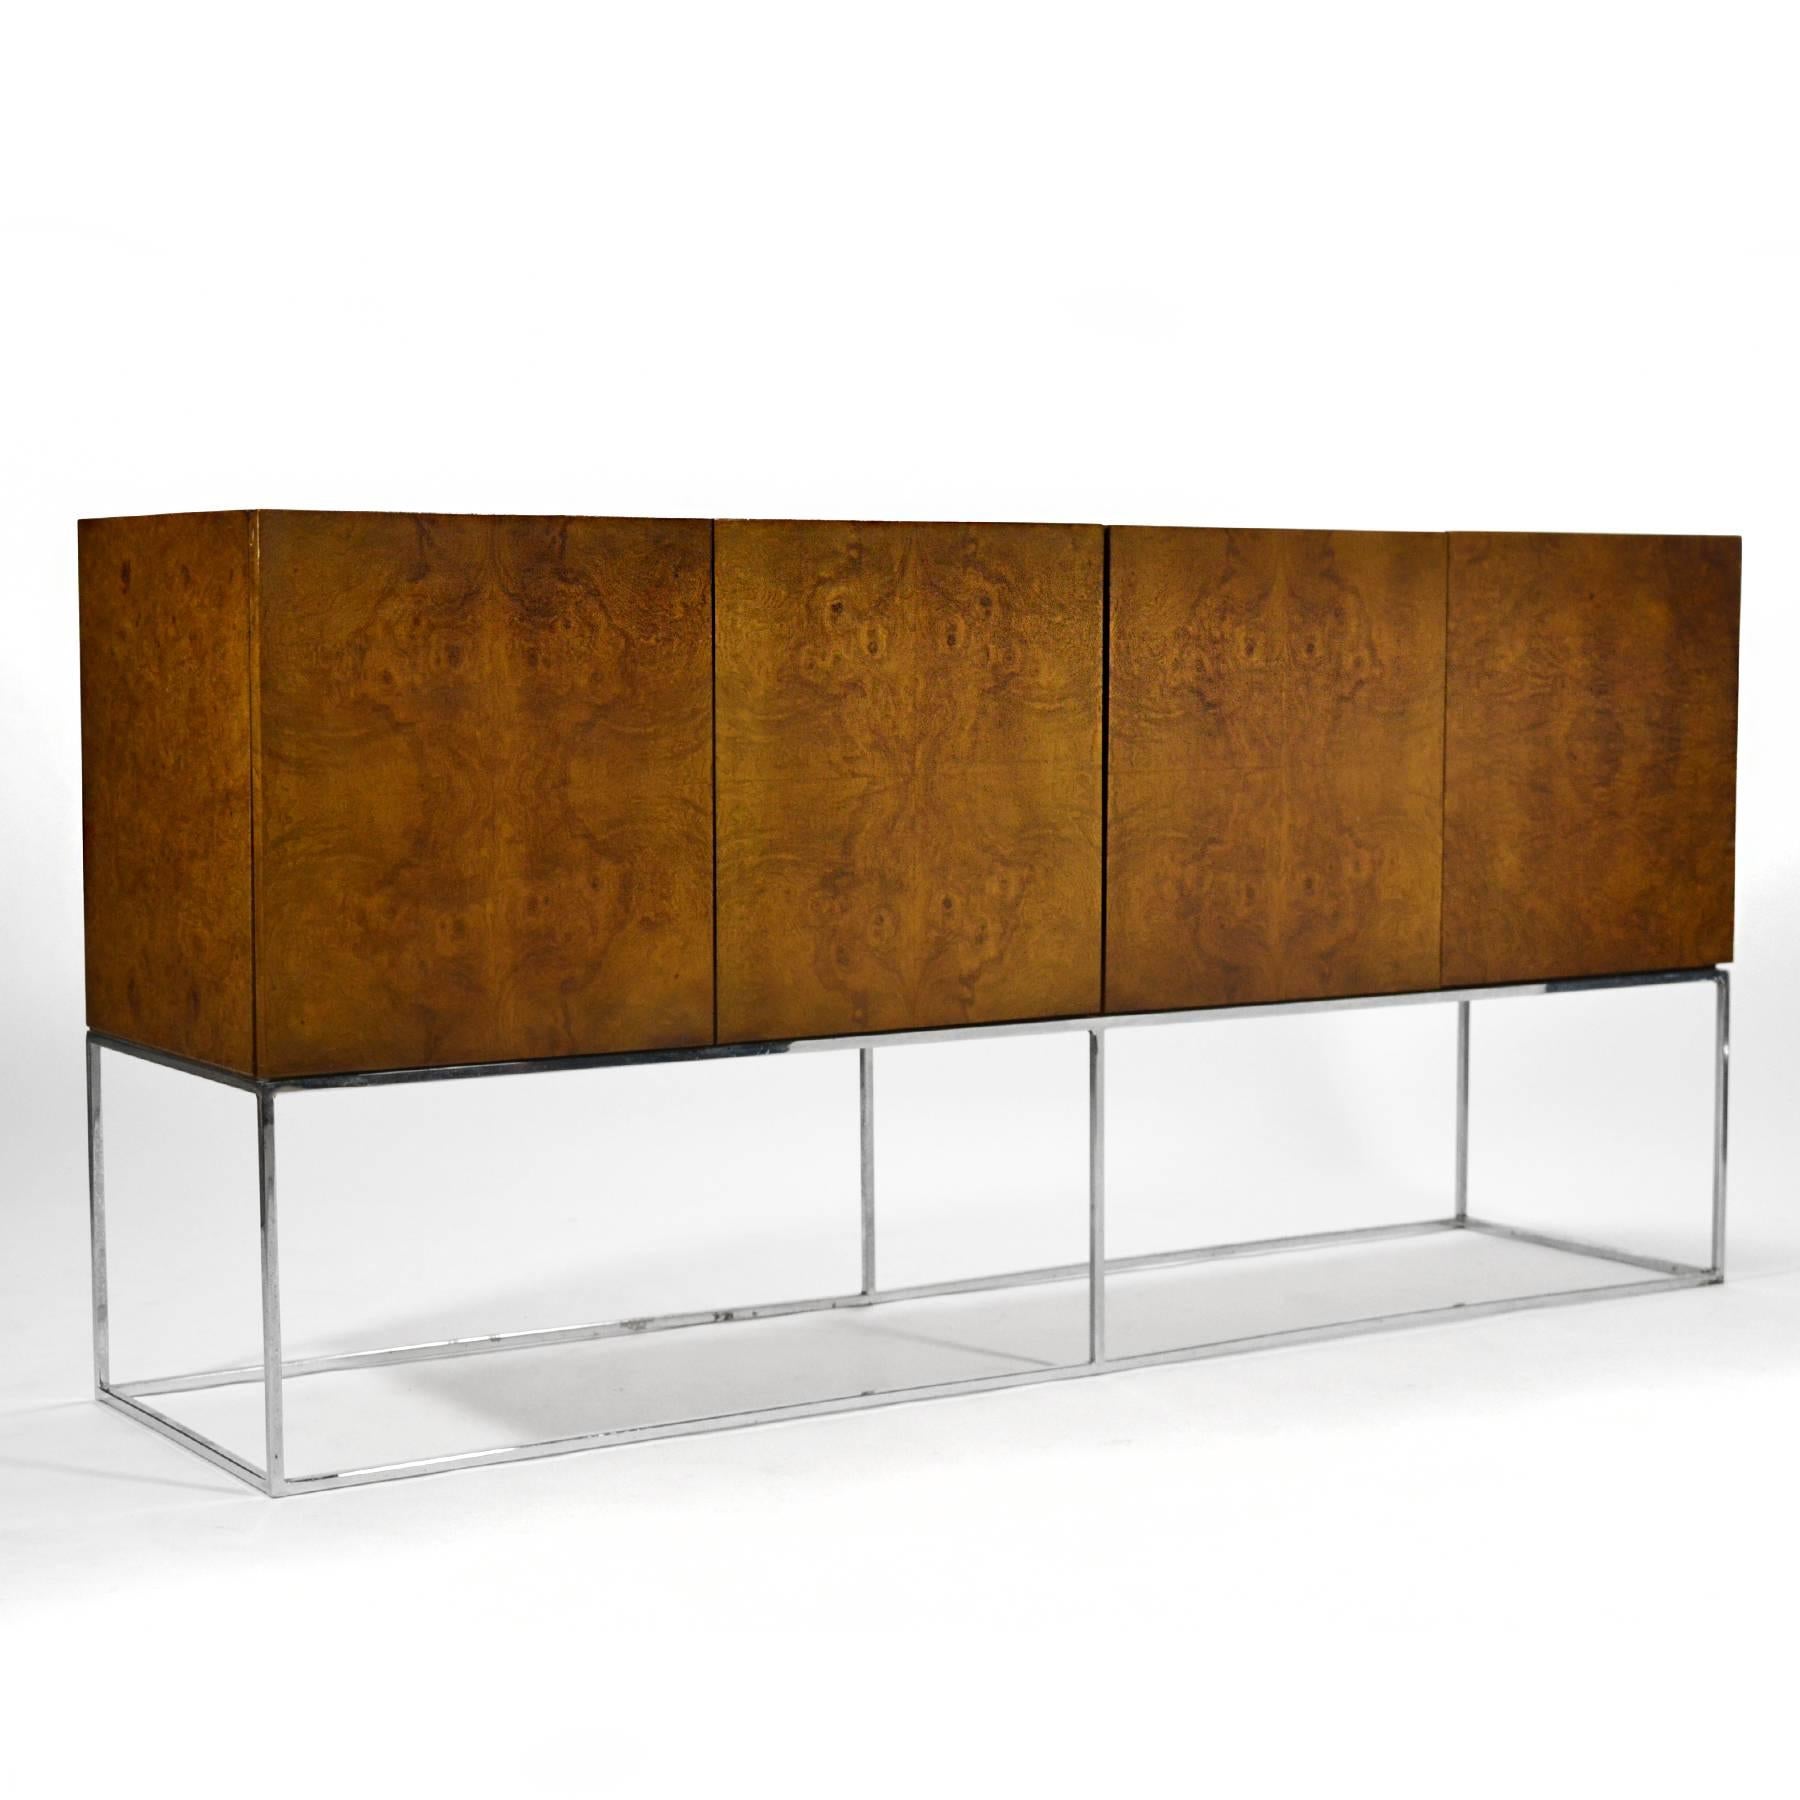 Perched on the chrome architectural base, this Milo Baughman credenza by Thayer Coggin has a great minimalist design paired with highly figured olive ash burl wood.